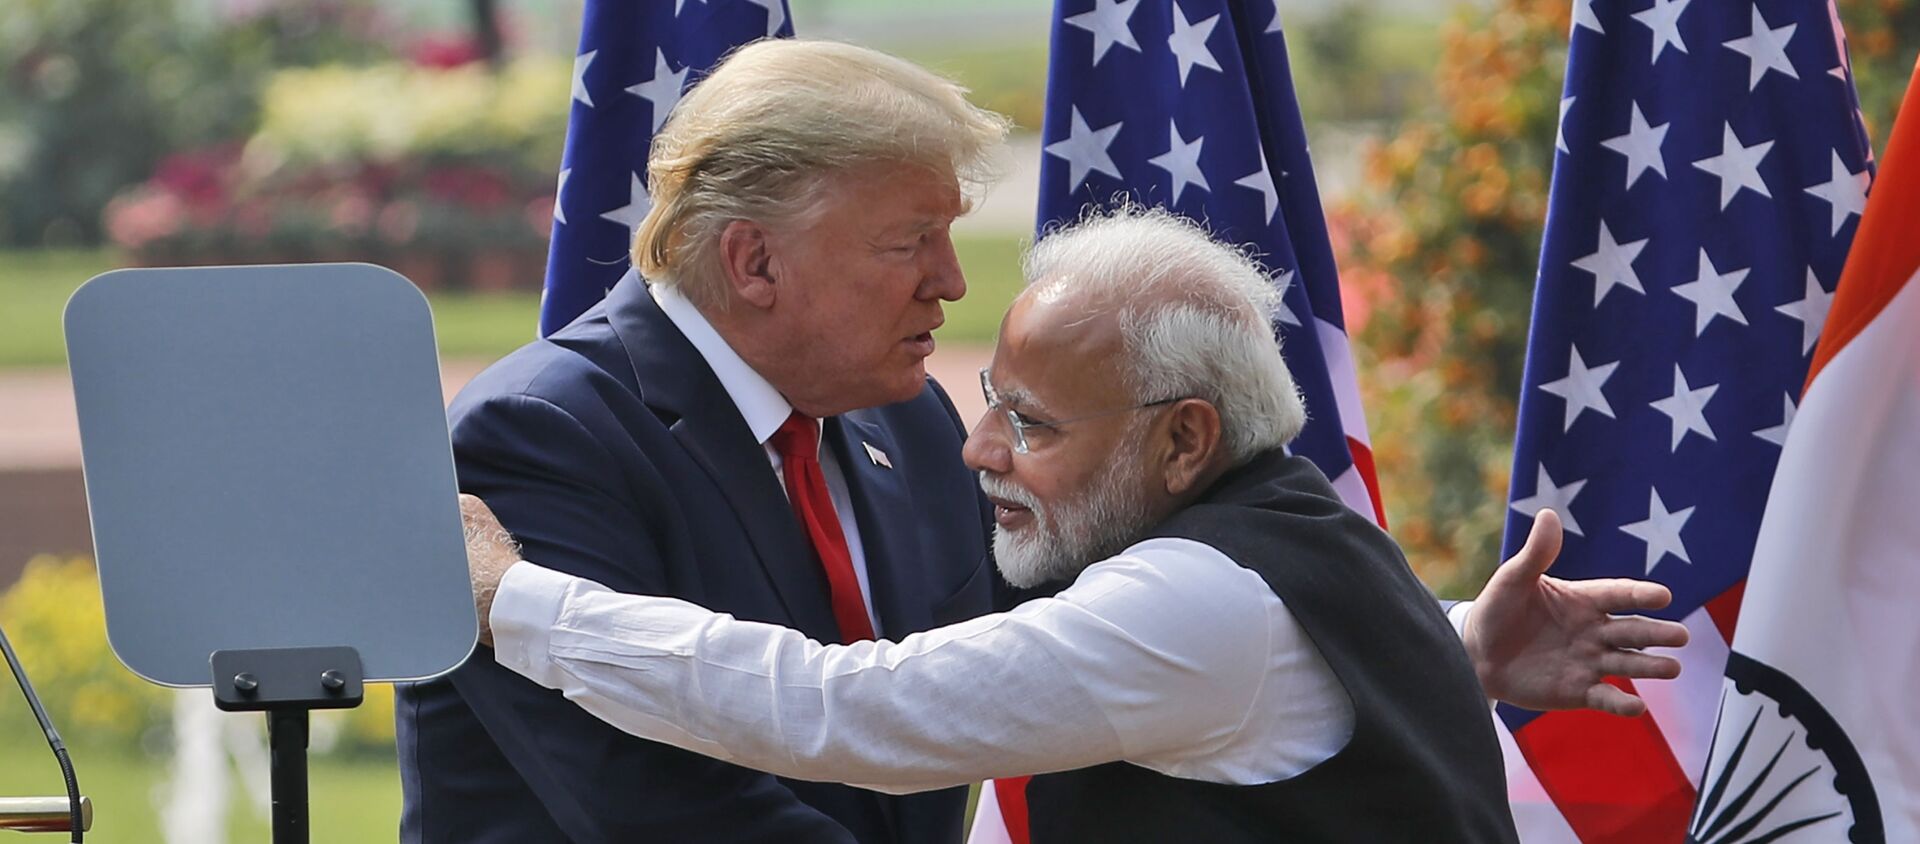 U.S. President Donald Trump and Indian Prime Minister Narendra Modi embrace after giving a joint statement in New Delhi, India, Tuesday, Feb. 25, 2020. - Sputnik International, 1920, 17.09.2020